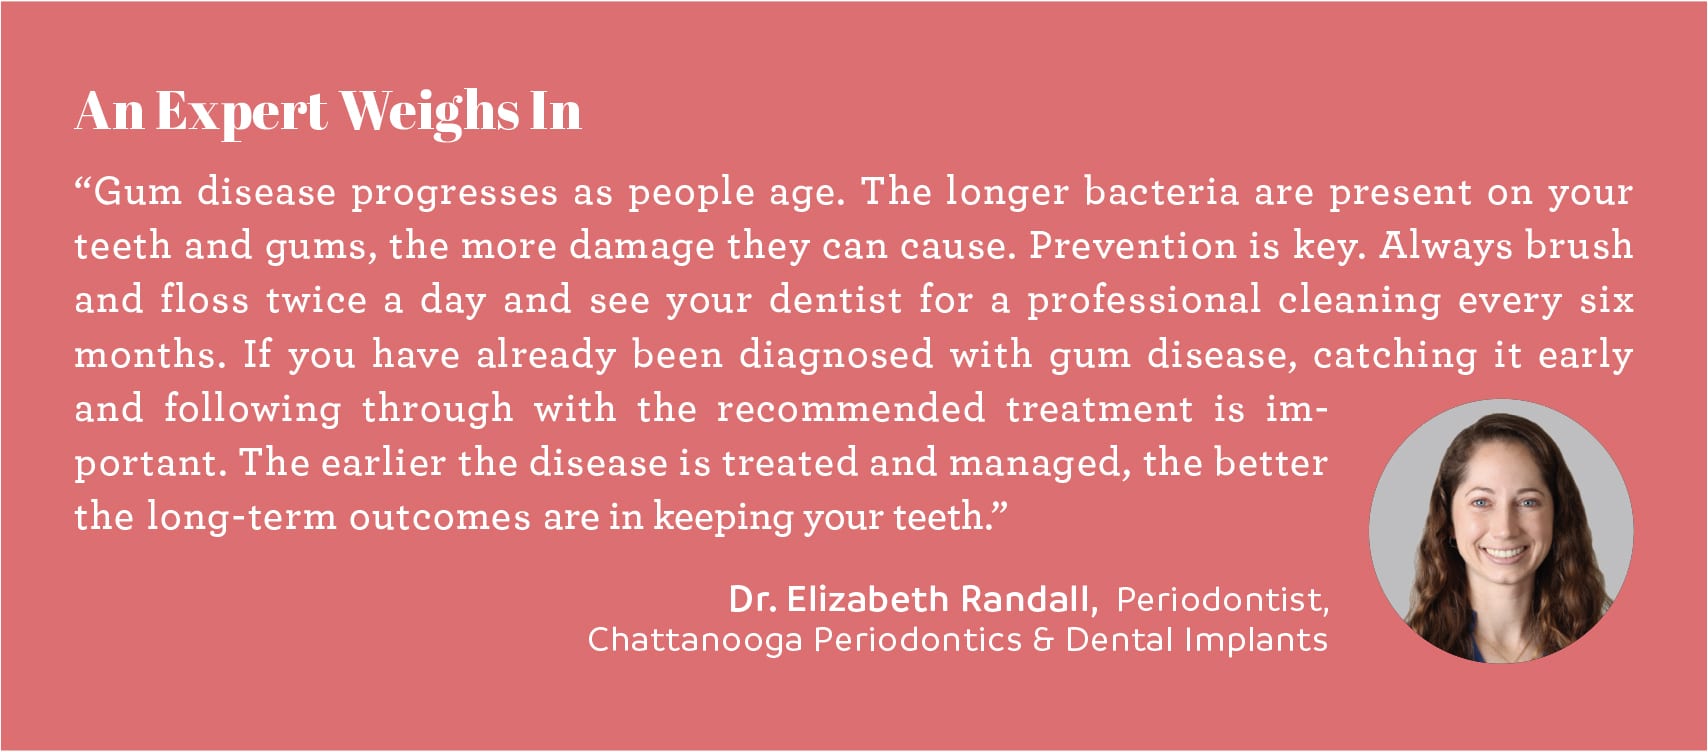 expert opinion chattanooga doctor elizabeth randall periodontist chattanooga periodontics and dental implants